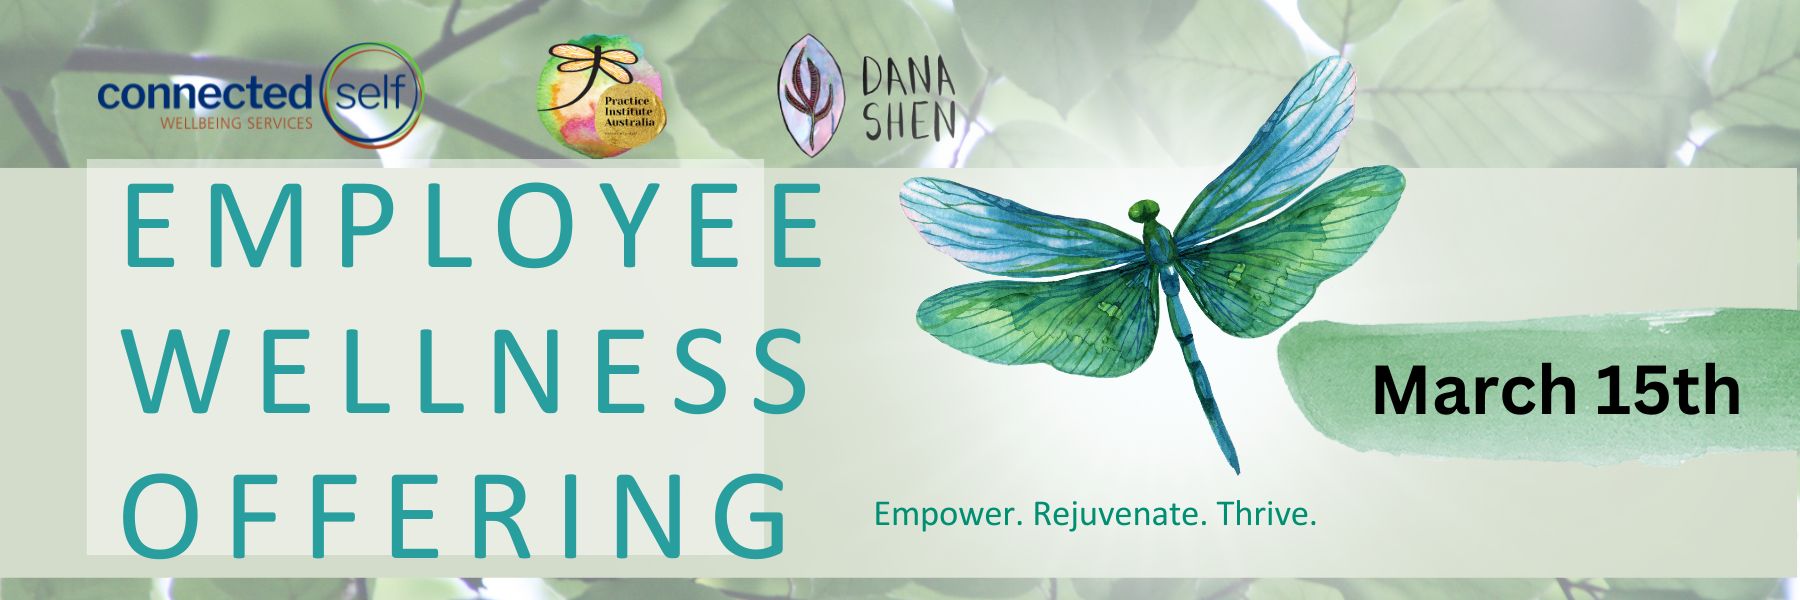 Employee Wellness Offering- March 15th